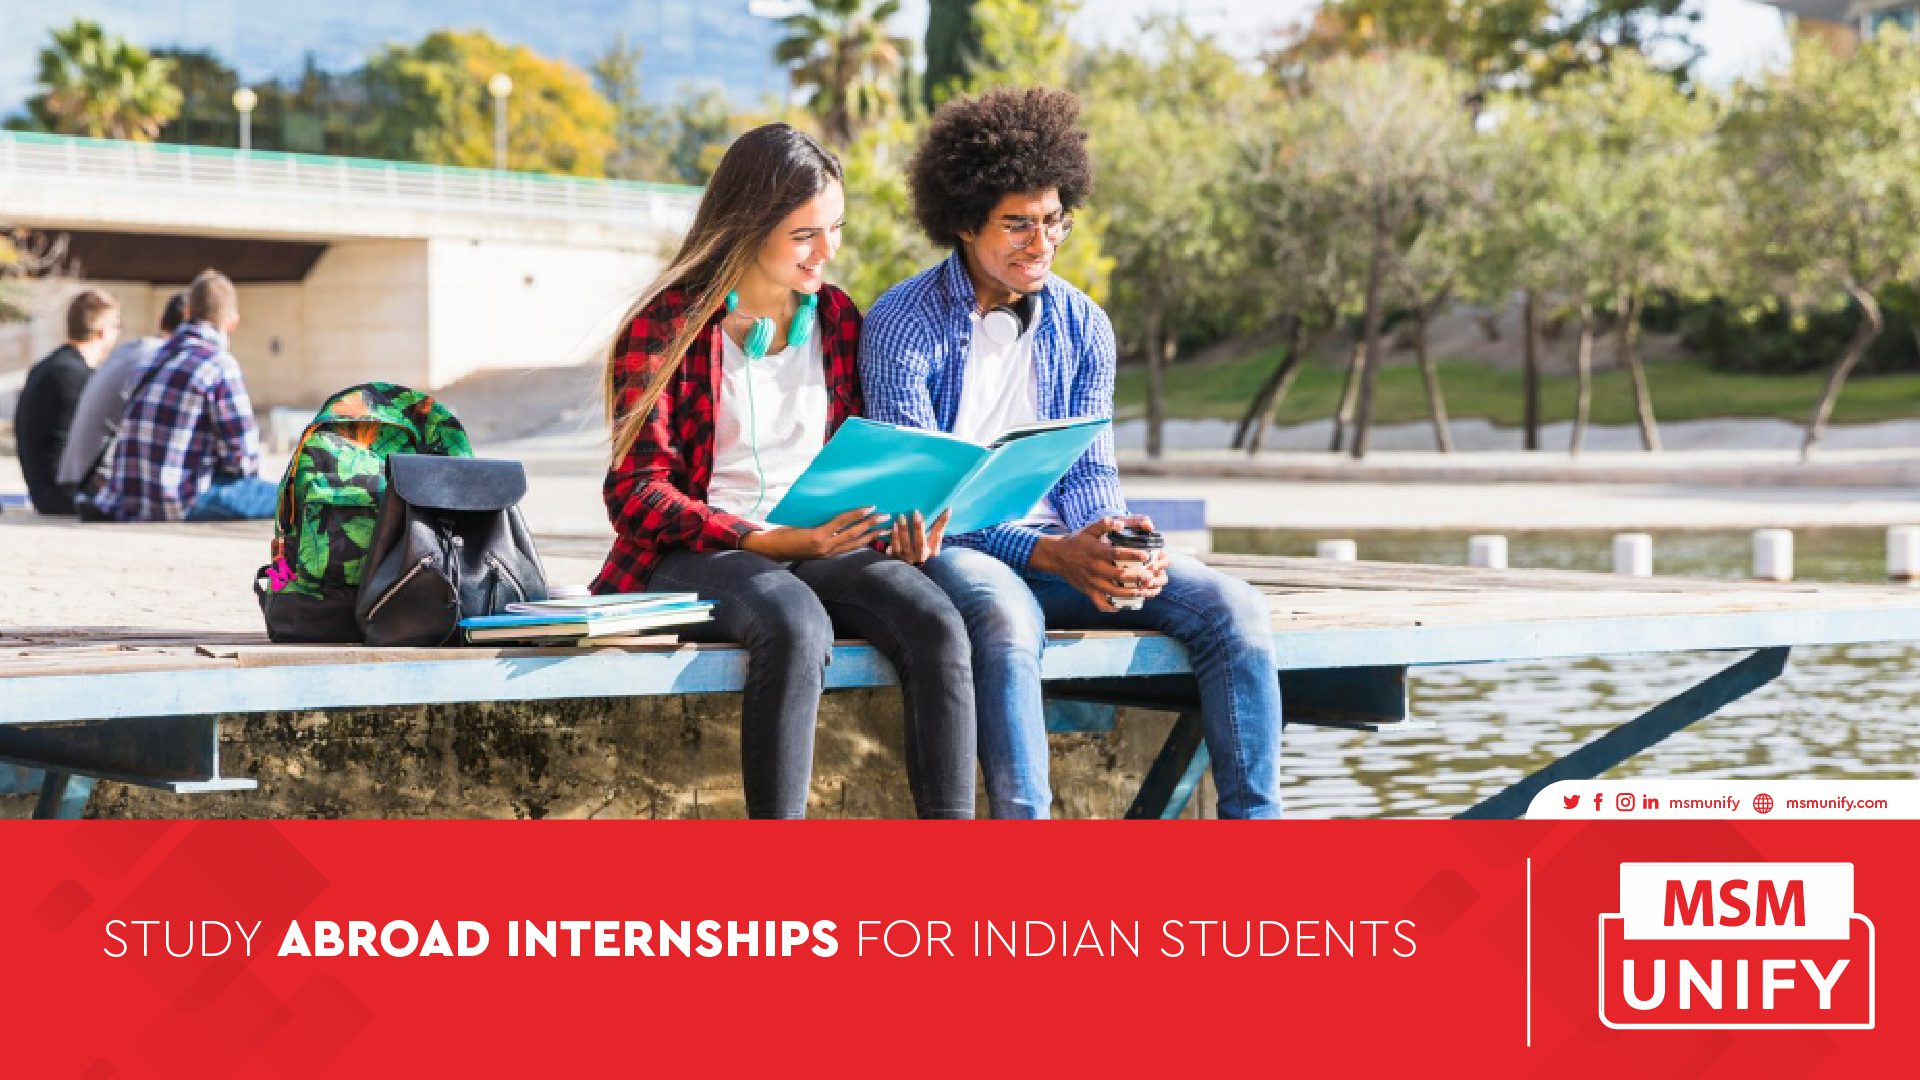 011923 MSM Unify Study Abroad Internships for Indian Students 01